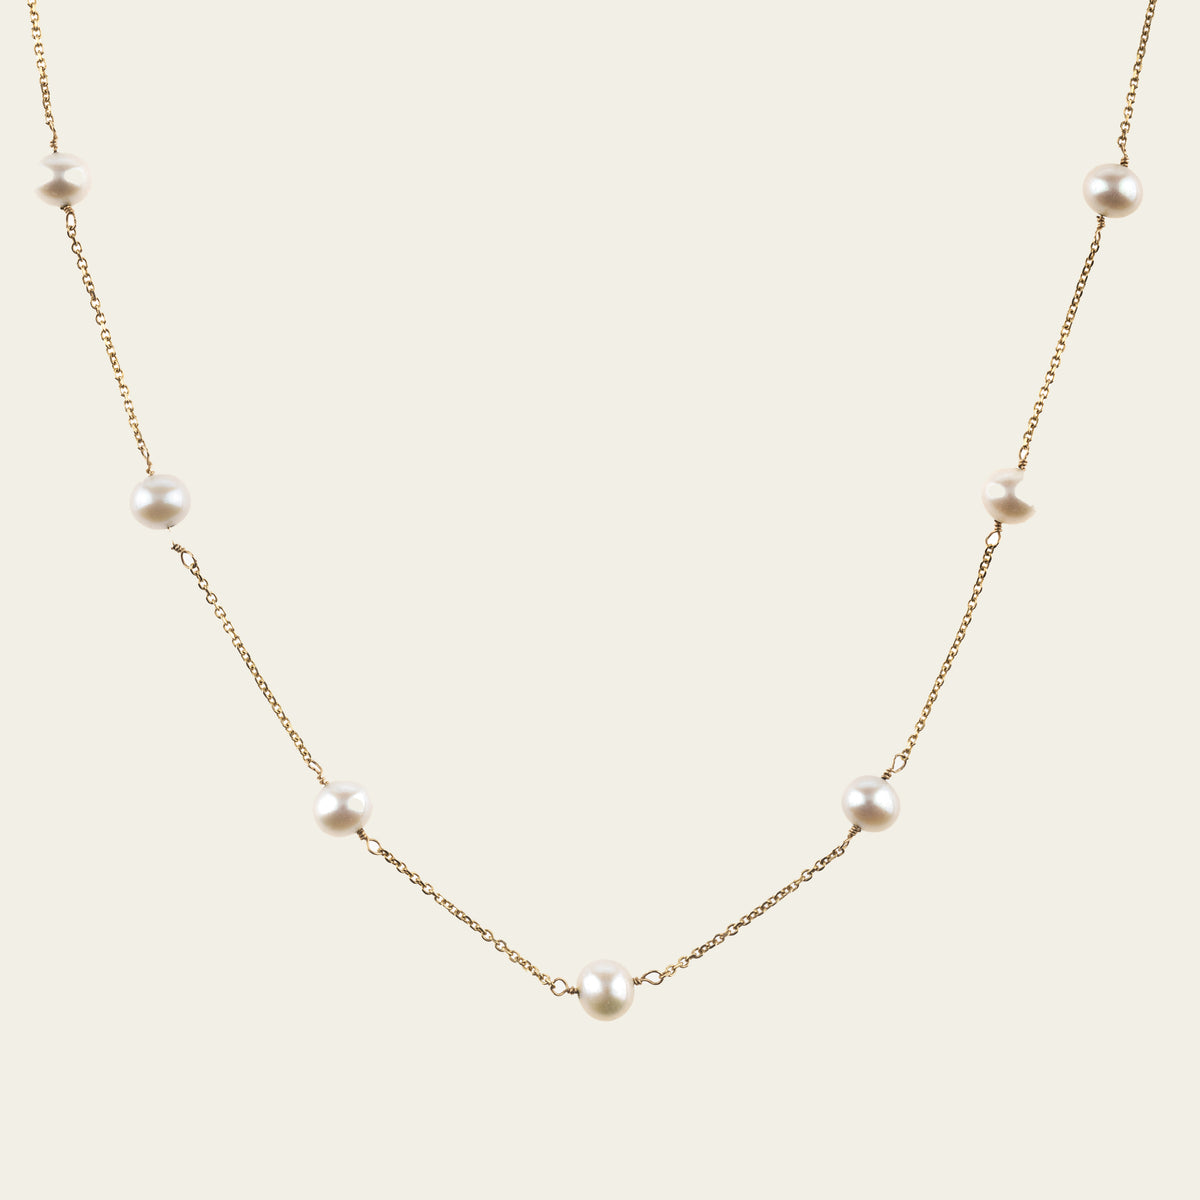 Mejuri 14K Yellow Gold Necklace Charms: Pearl Drop Charm | Pearl